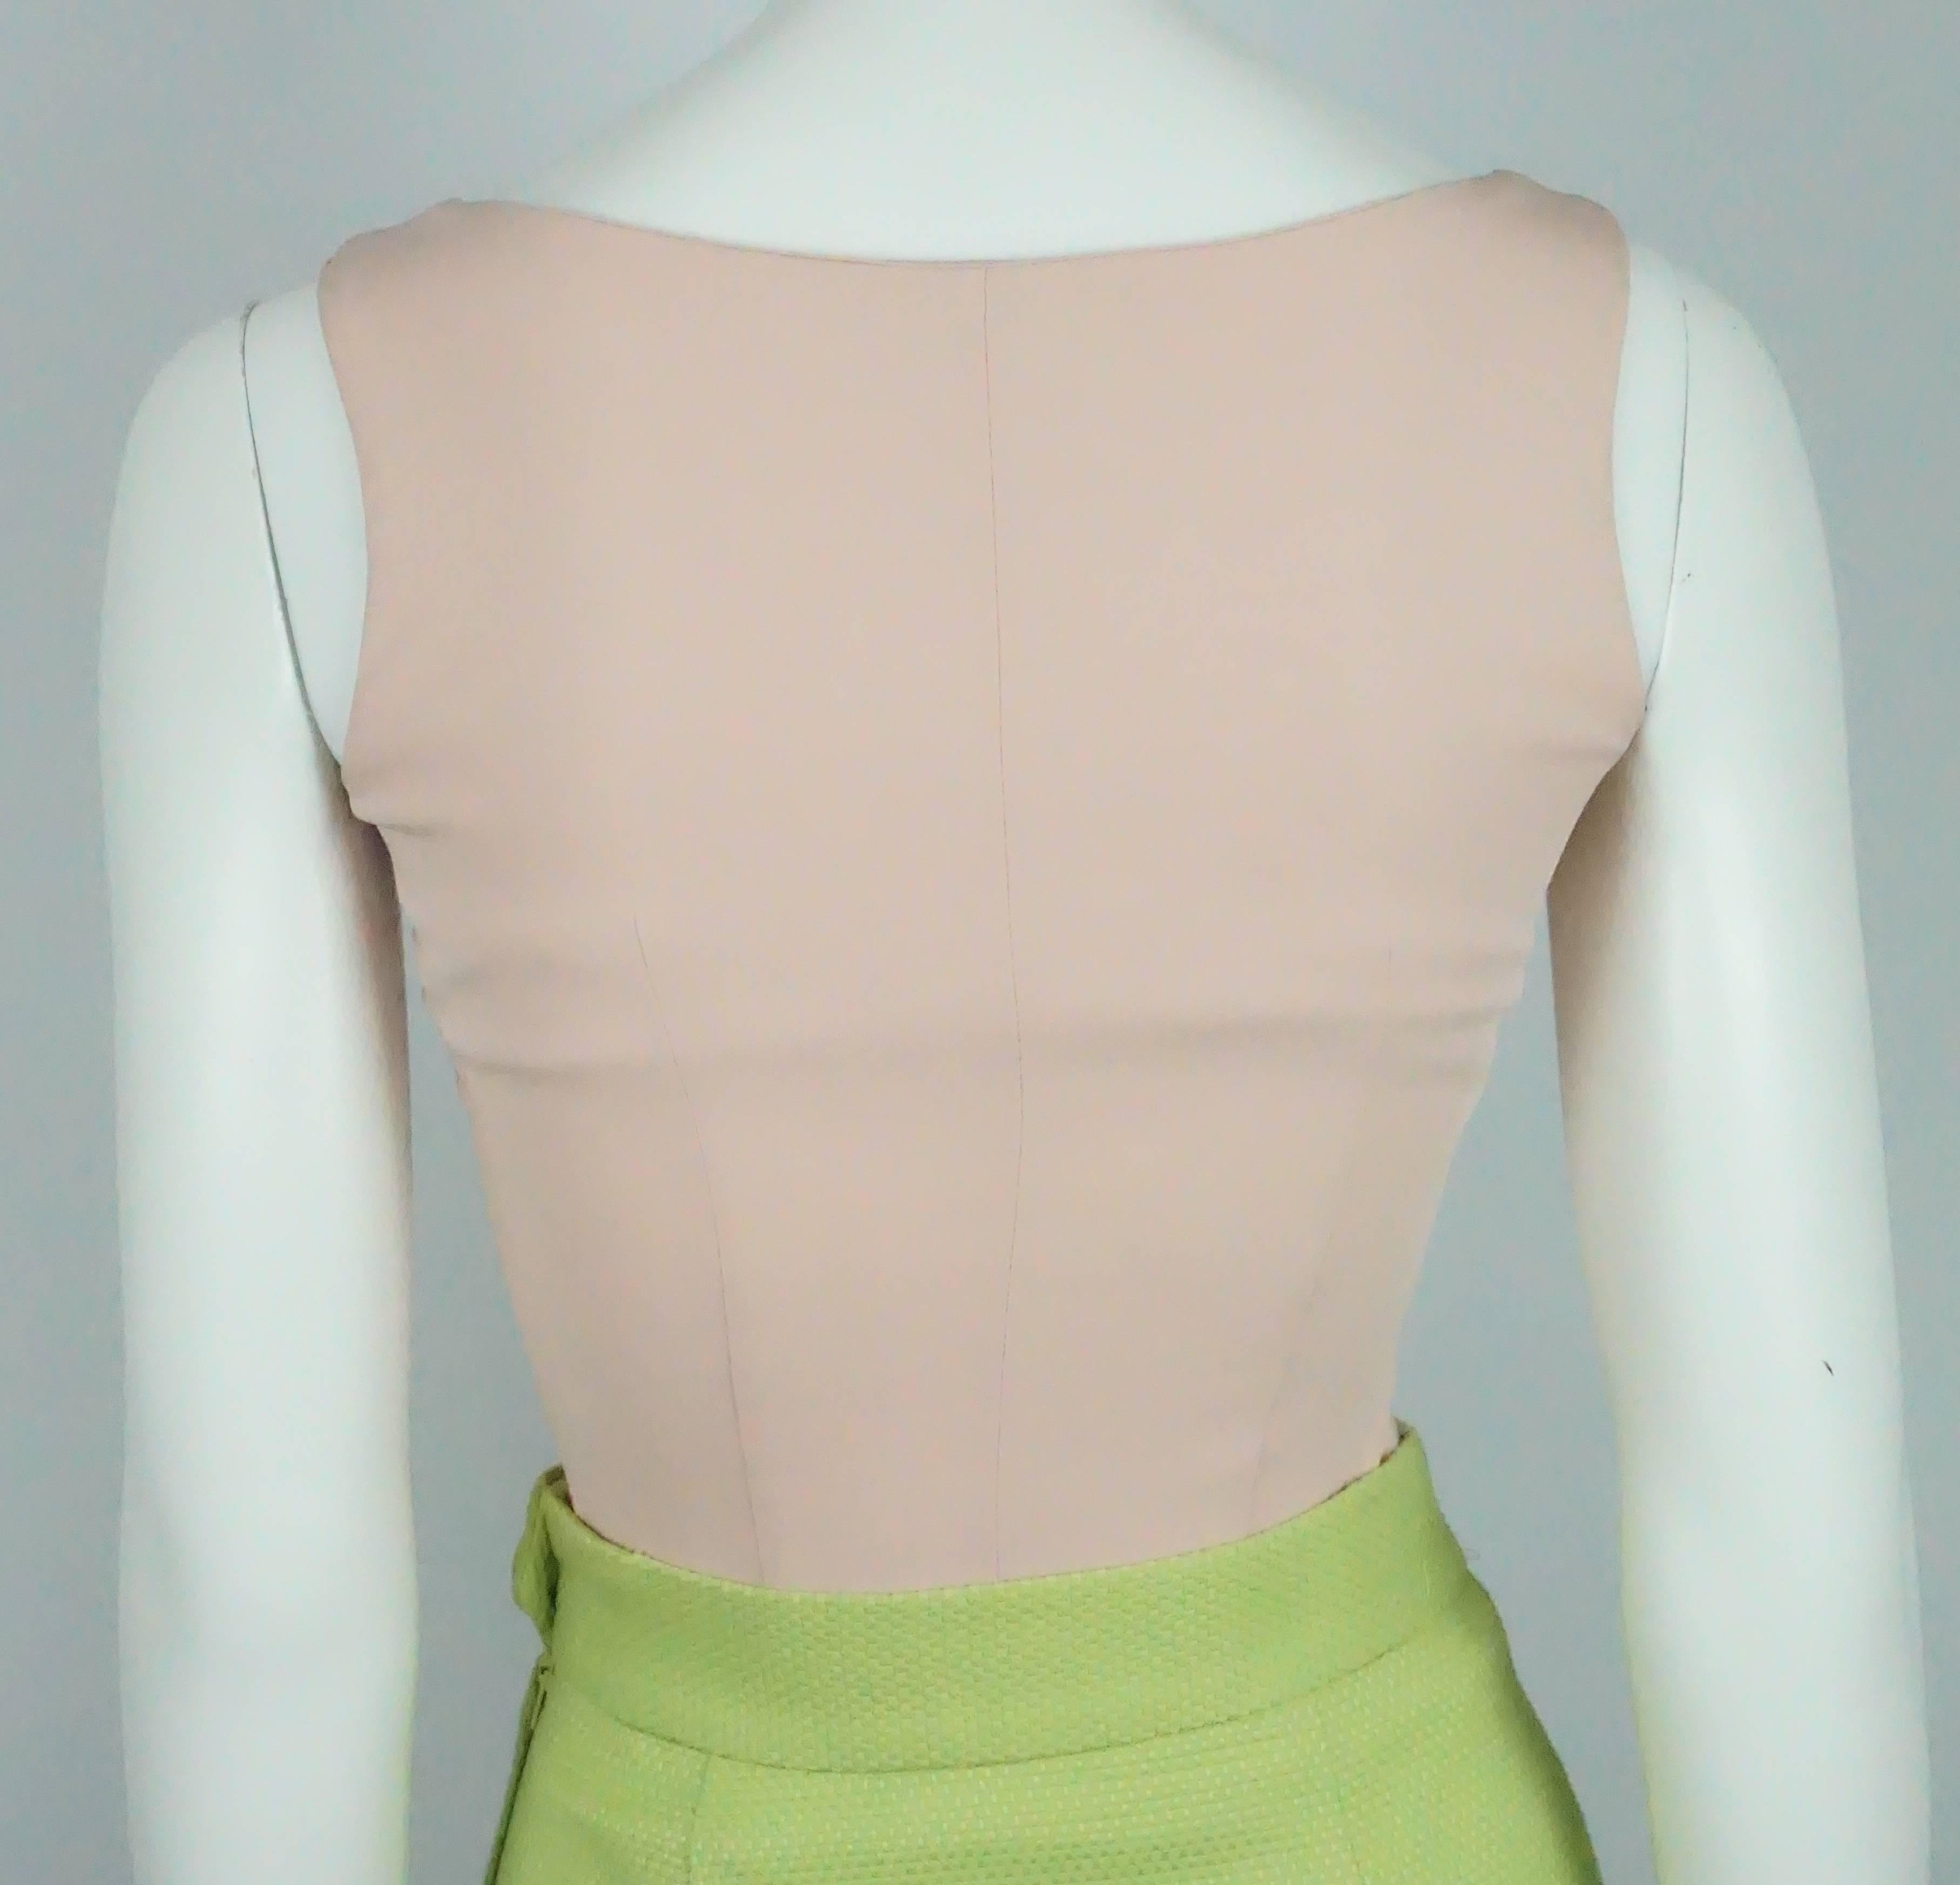 Moschino Cheap and Chic Jacket/Skirt/Top Lime Green Pique w/ Pink Silk Trim - 4 5